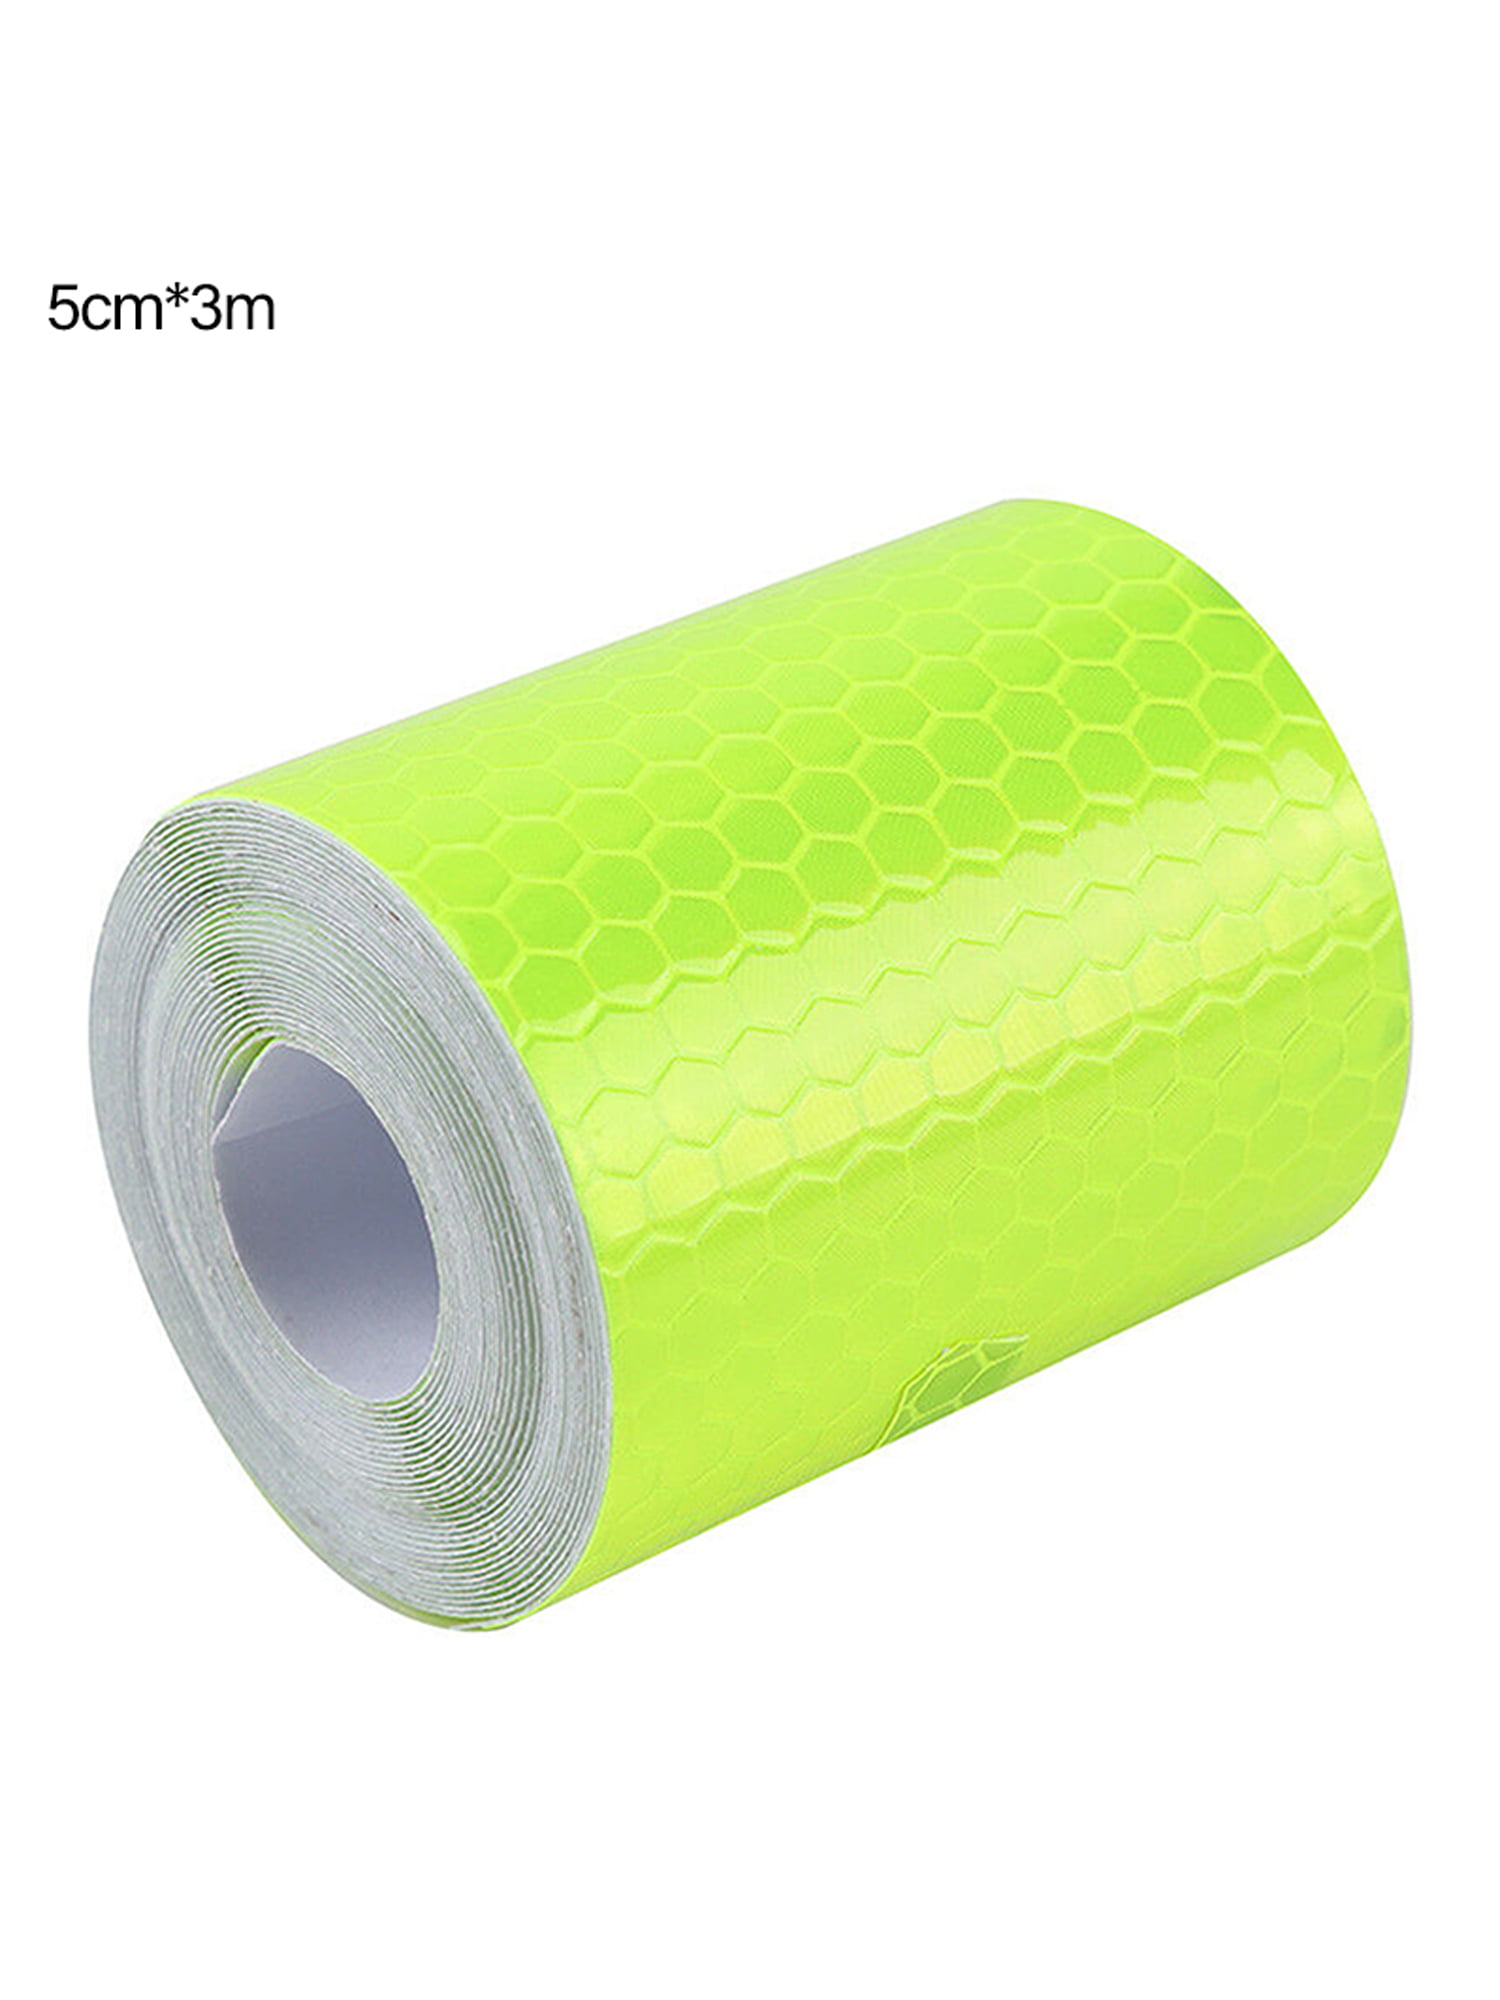 3M Hi-Vis Reflective Tape Safety Self-Adhesive for Cars Barrier Trailer Truck 